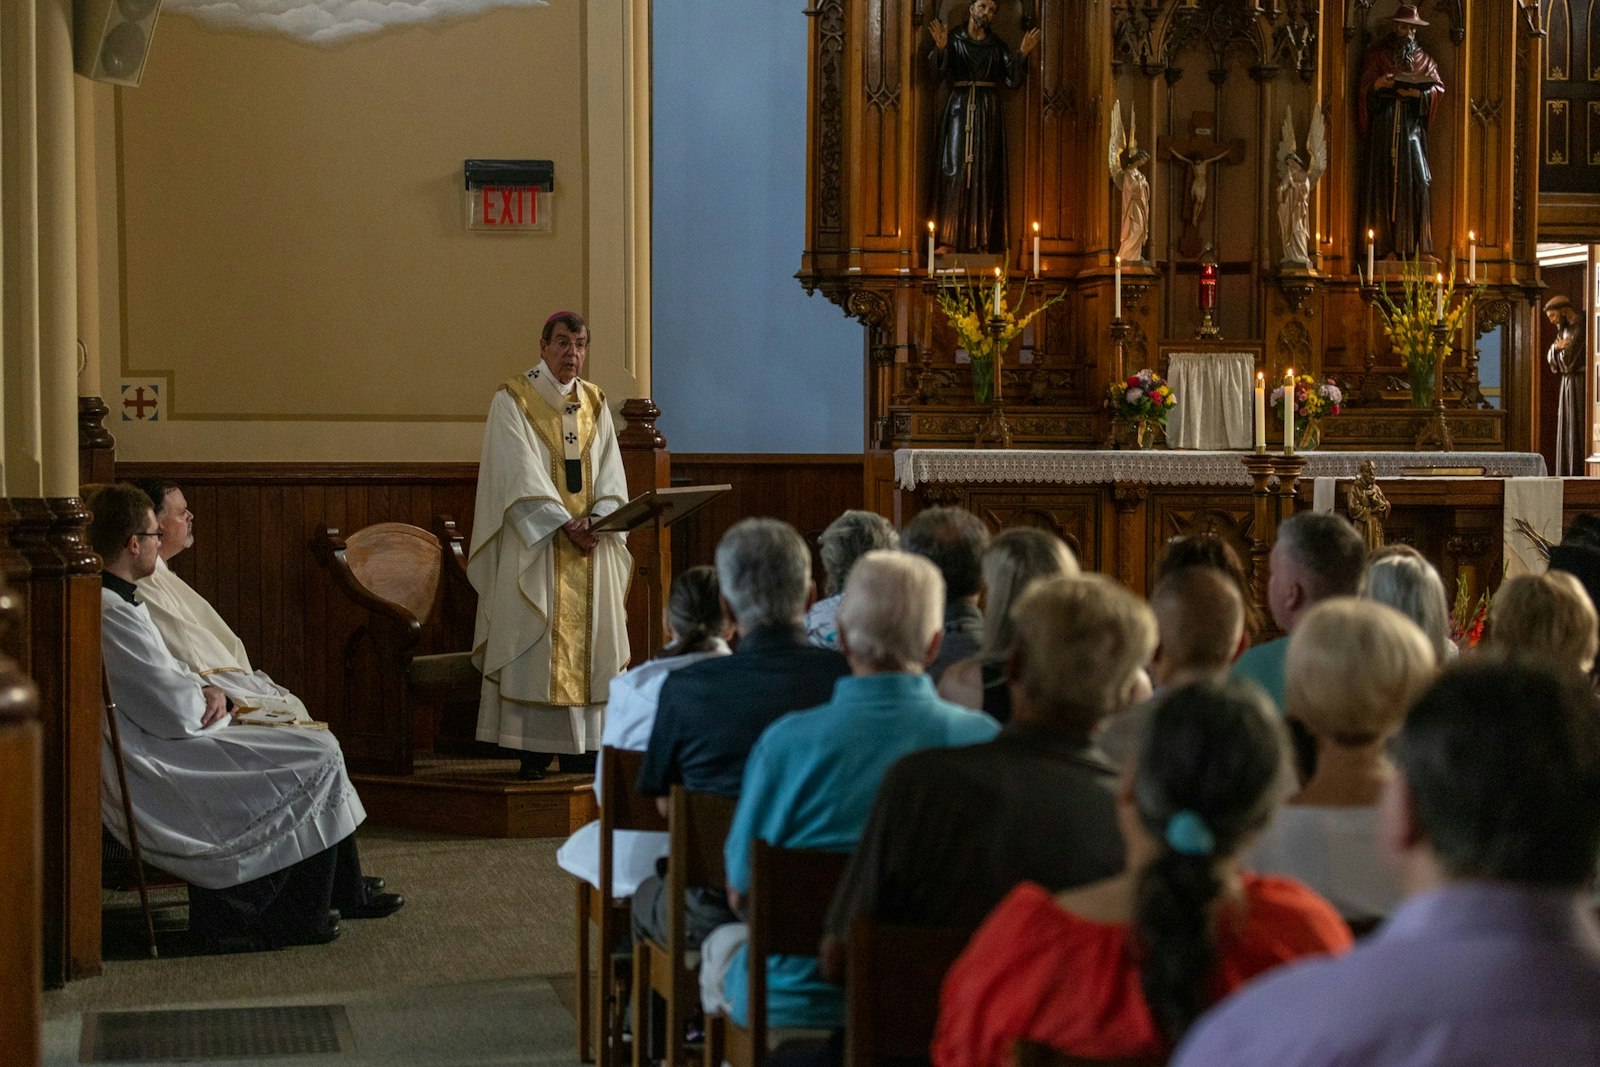 Archbishop Vigneron delivers his homily by candlelight in the chapel of St. Bonaventure Monastery. Wisdom, the archbishop said, is not about having worldly knowledge or technical expertise, but the ability to see God's will in all things, as Blessed Solanus Casey had. Blessed Solanus' feast day is July 30, the day before the anniversary of the friar's death in 1957.